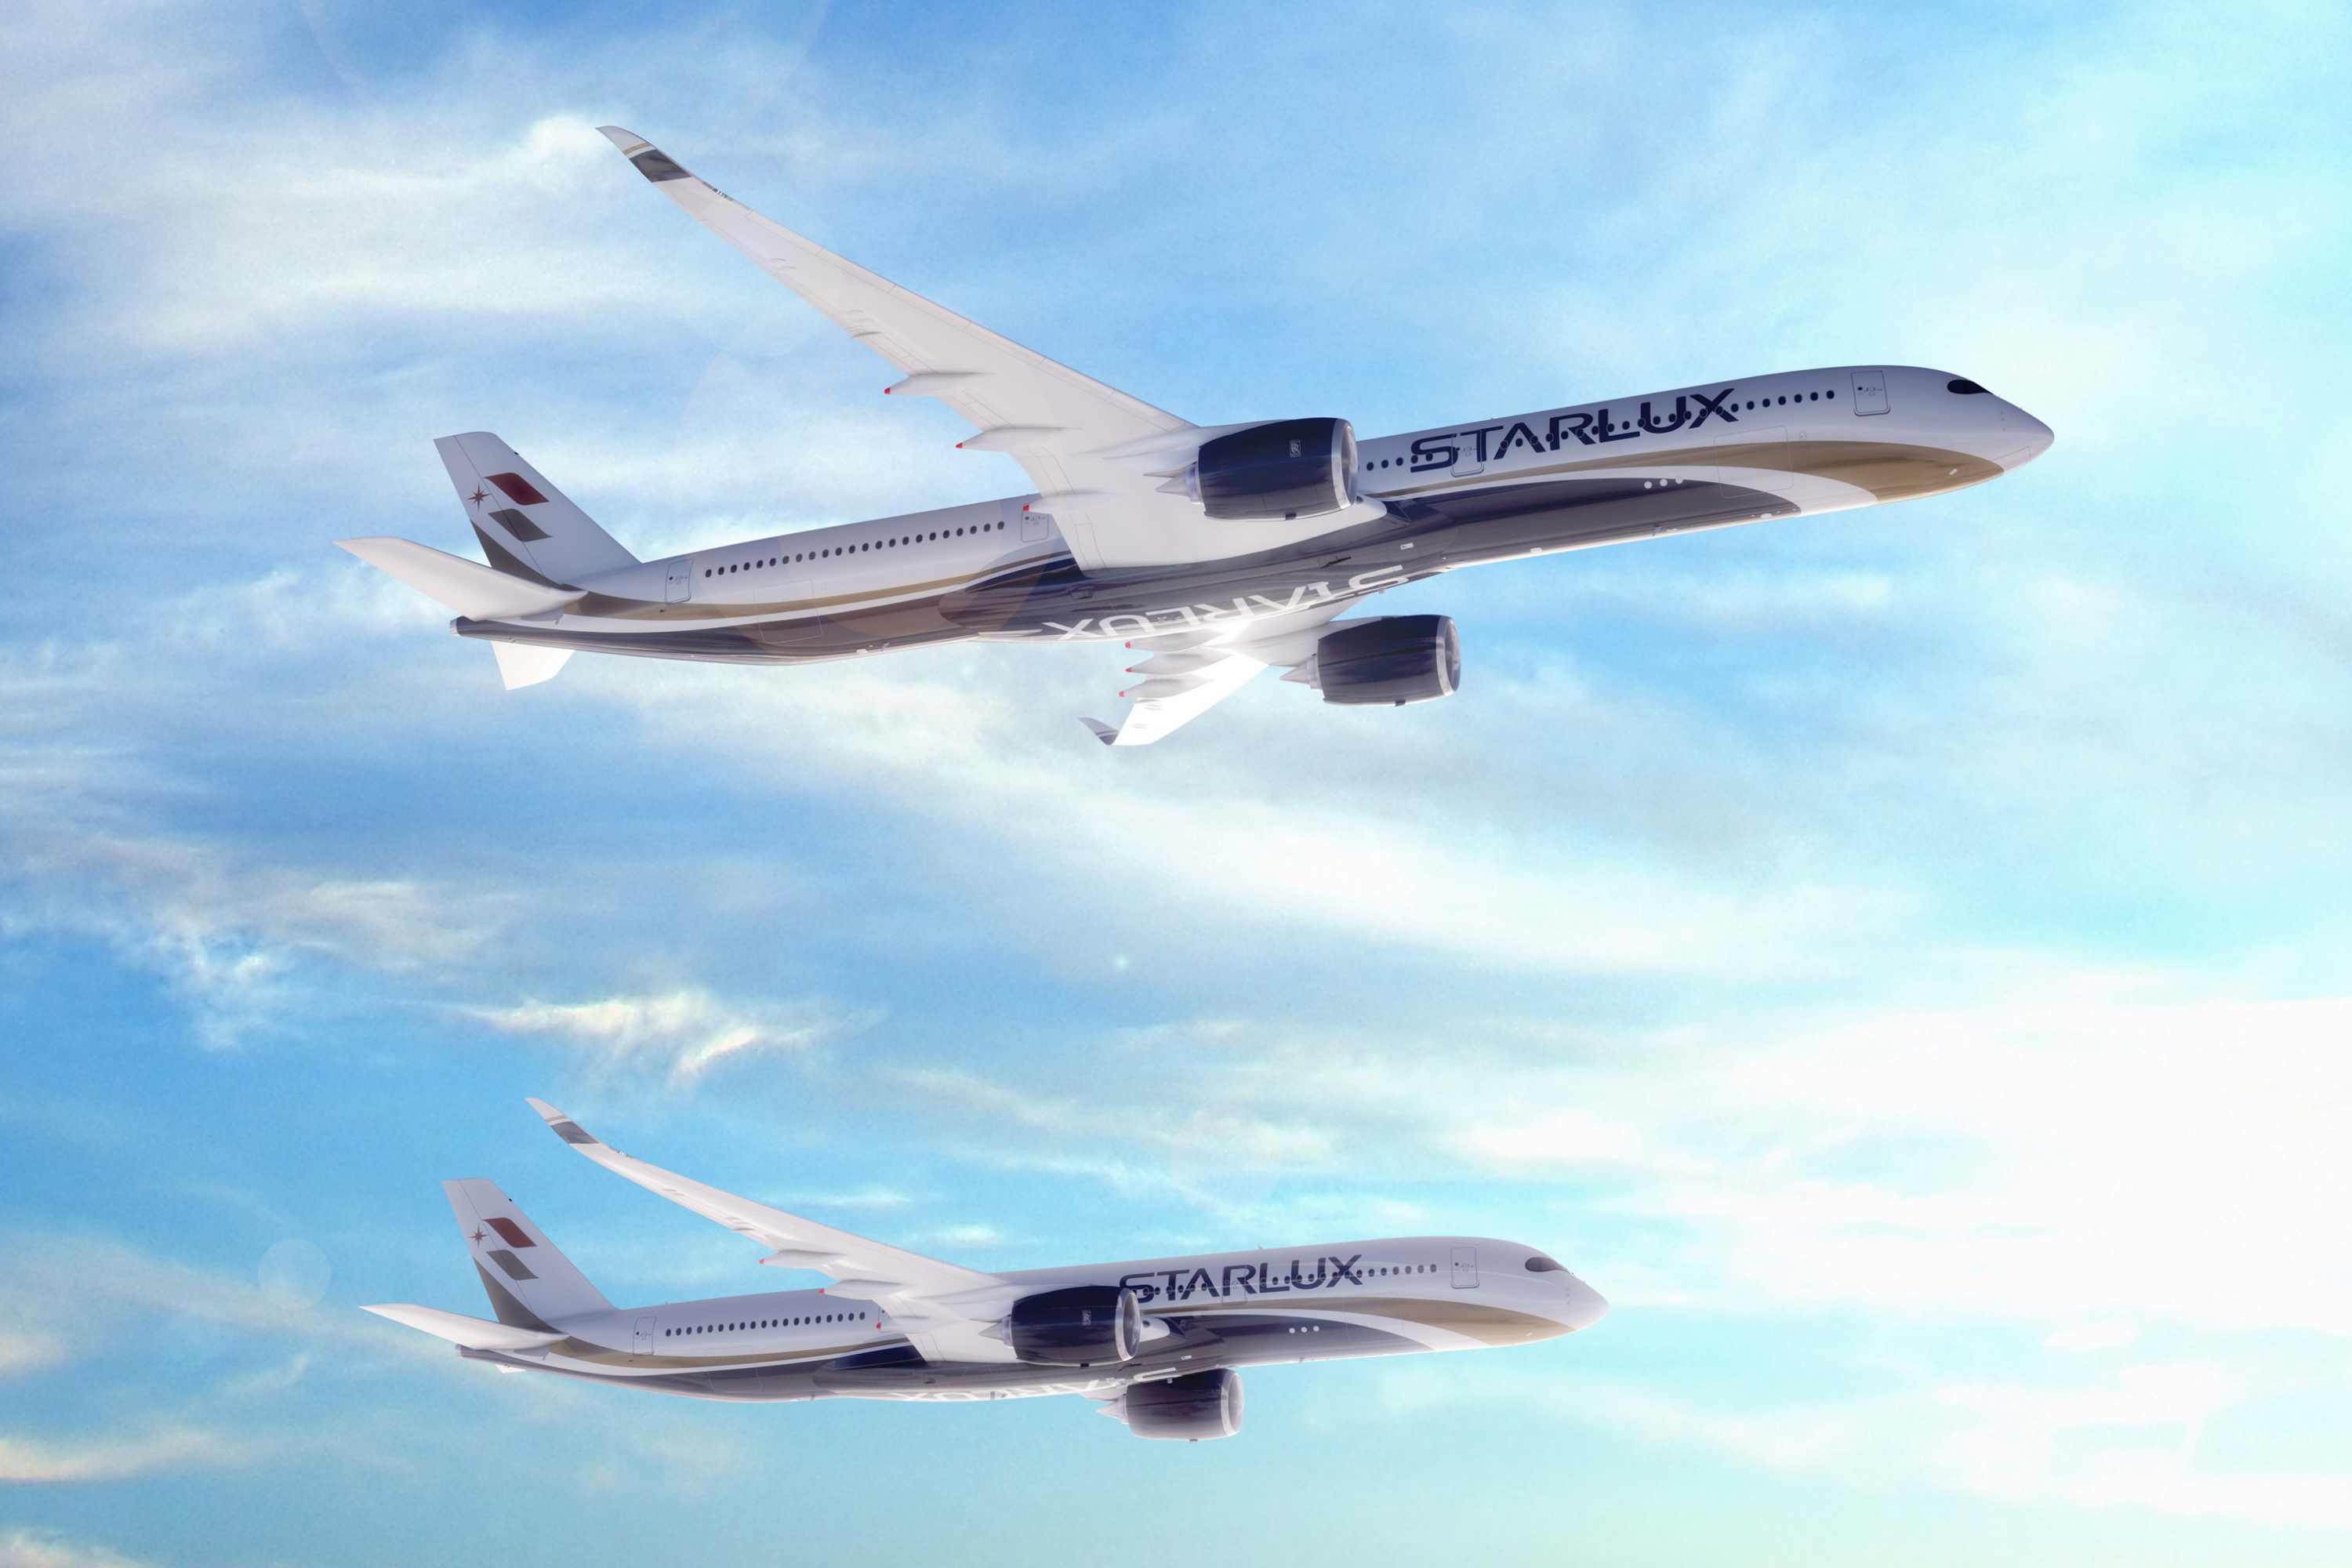 Starlux Airlines of Taiwan has signed a firm order with Airbus for 17 widebody aircraft, comprising 12 A350-1000s and five A350-900s. The new airline plans to deploy these aircraft on its premier long-haul services from Taipei to Europe and North America, as well as selected destinations within the Asia-Pacific region. Click to enlarge.